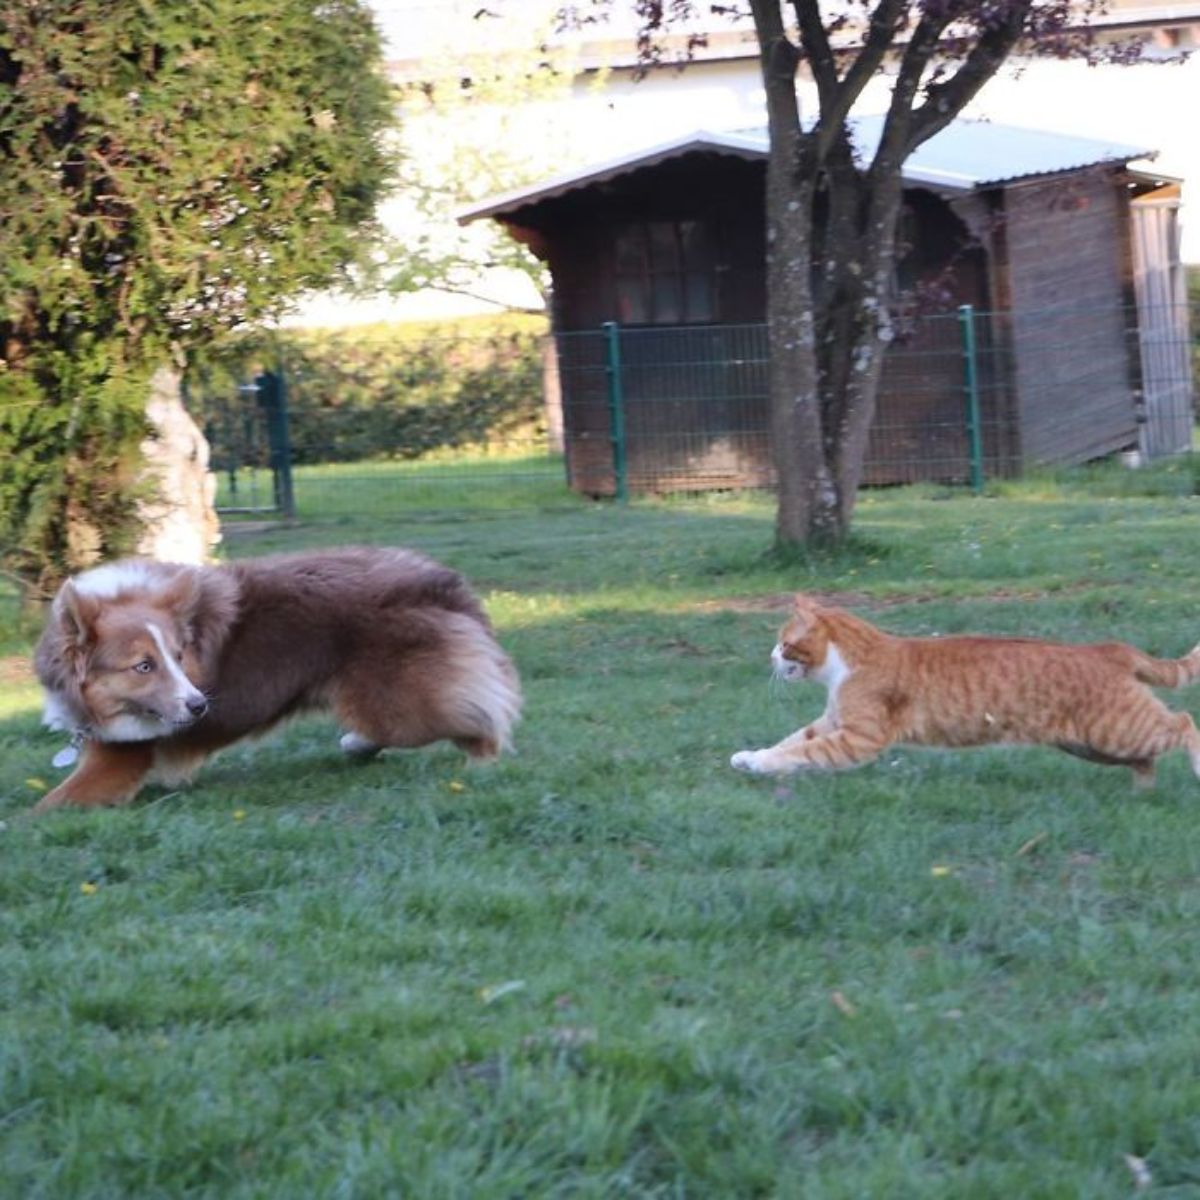 fluffy brown and white dog being chased by an orange and white cat